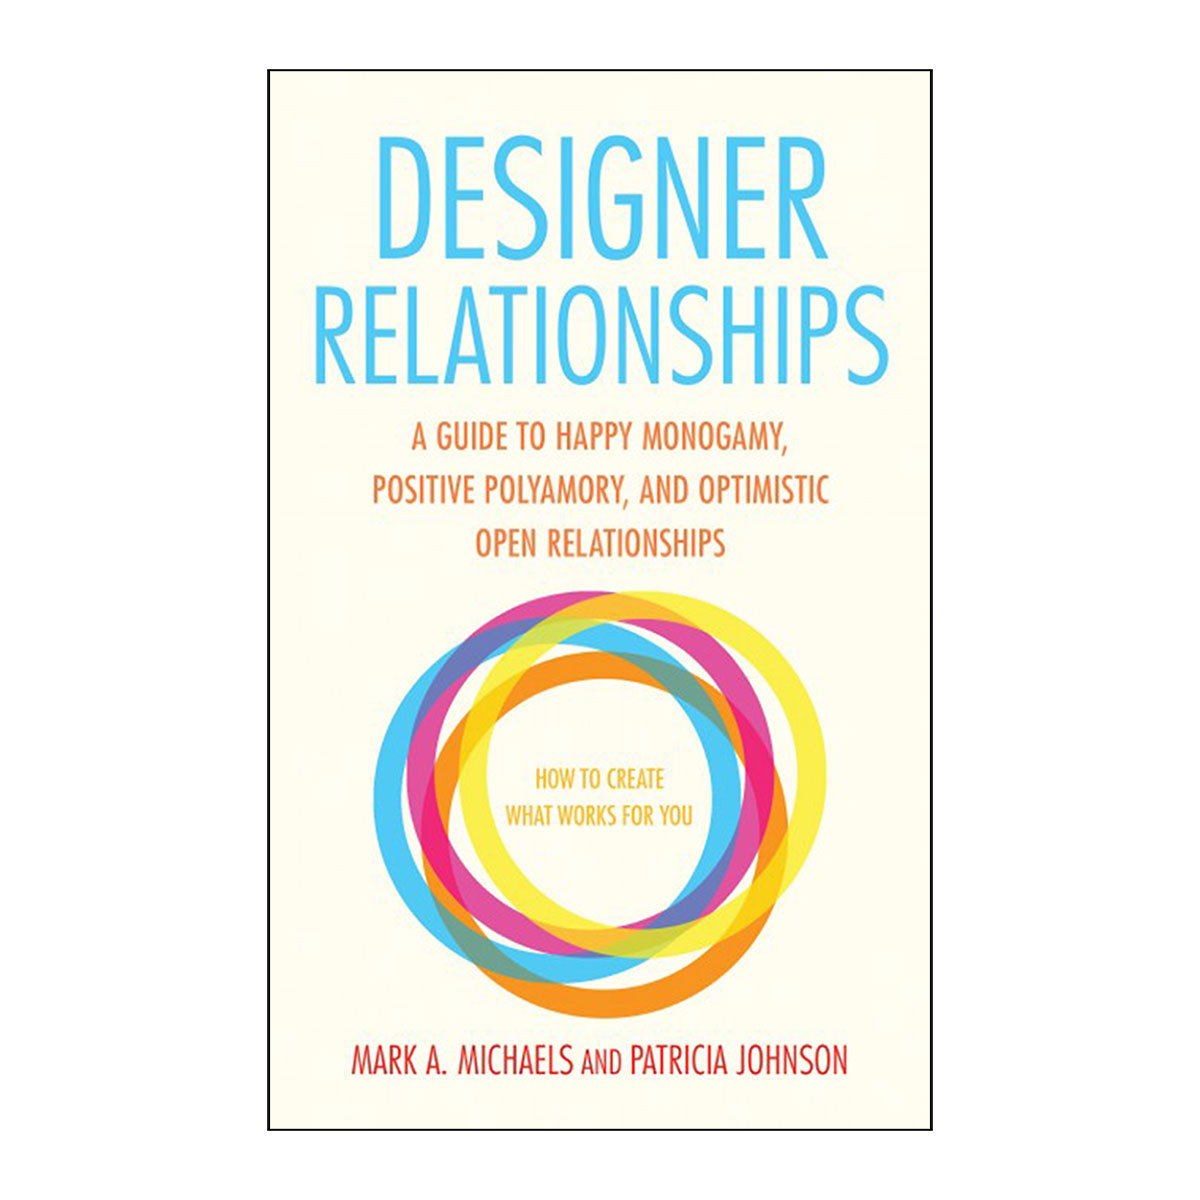 Designer Relationships - A Guide to Happy Monogamy, Positive Polyamory, and Optimistic Open Relationships - Cleis Press